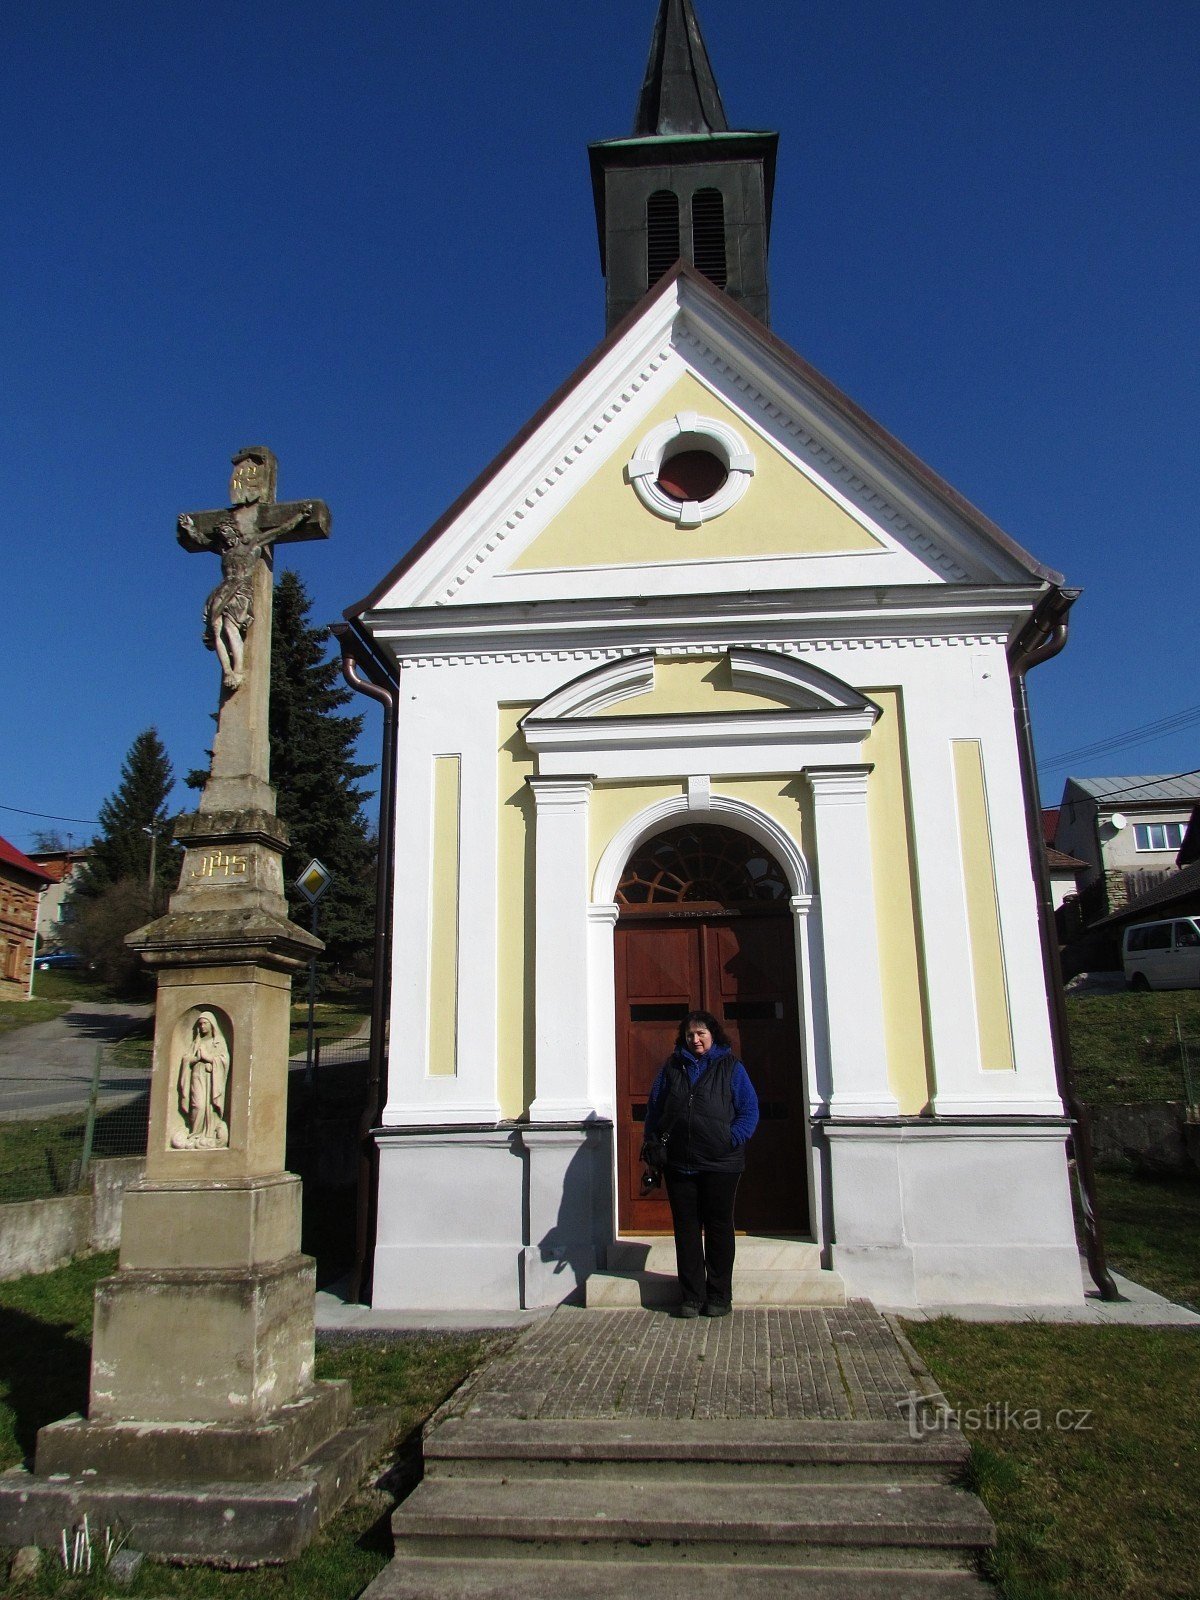 Two chapels - St. Martin and the Virgin Mary in the local area - Příluky near Zlín